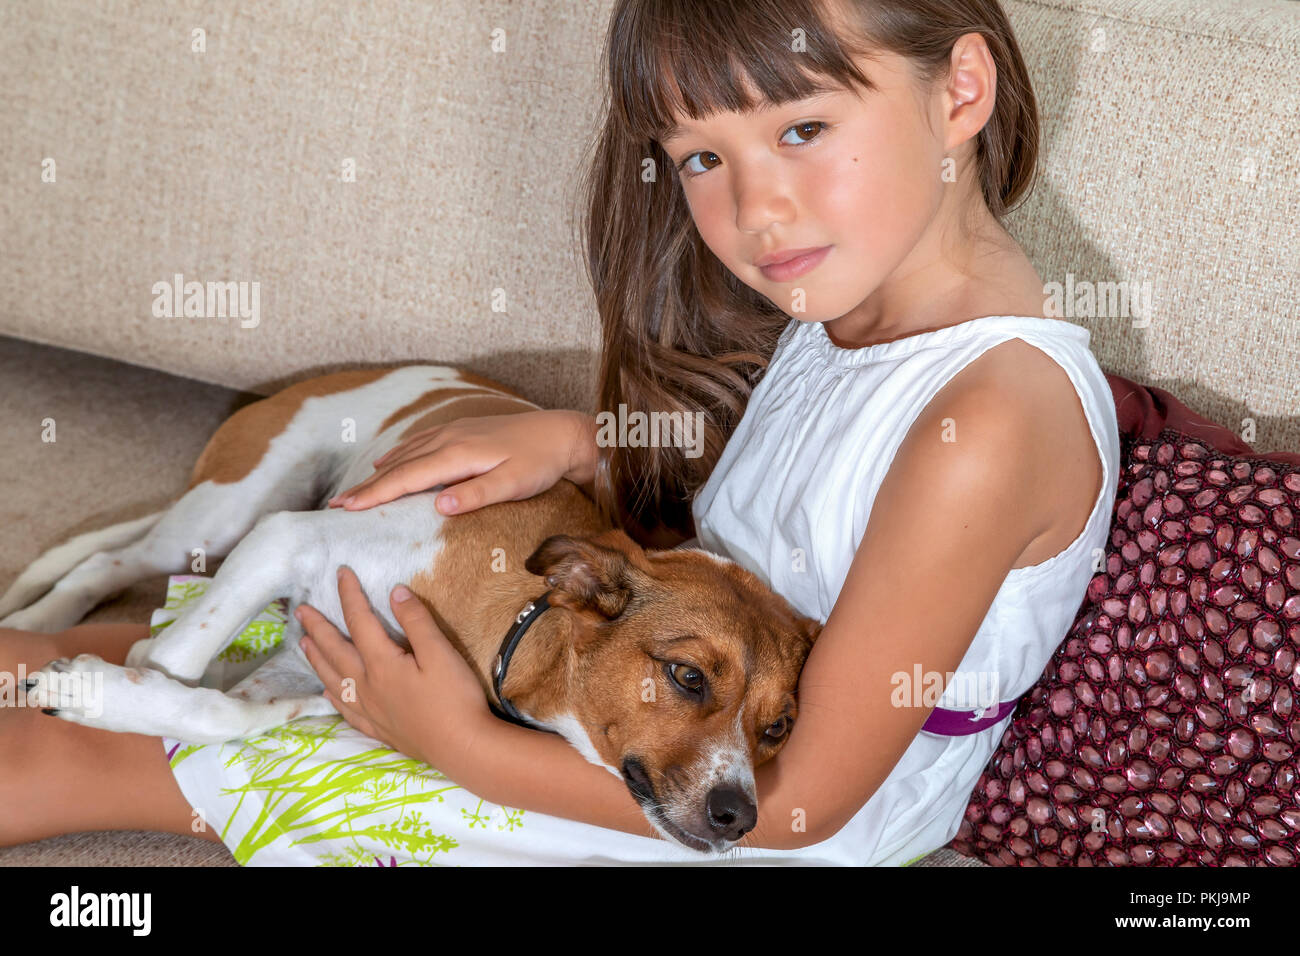 A six year old girl holding her female pet on a sofa Stock Photo